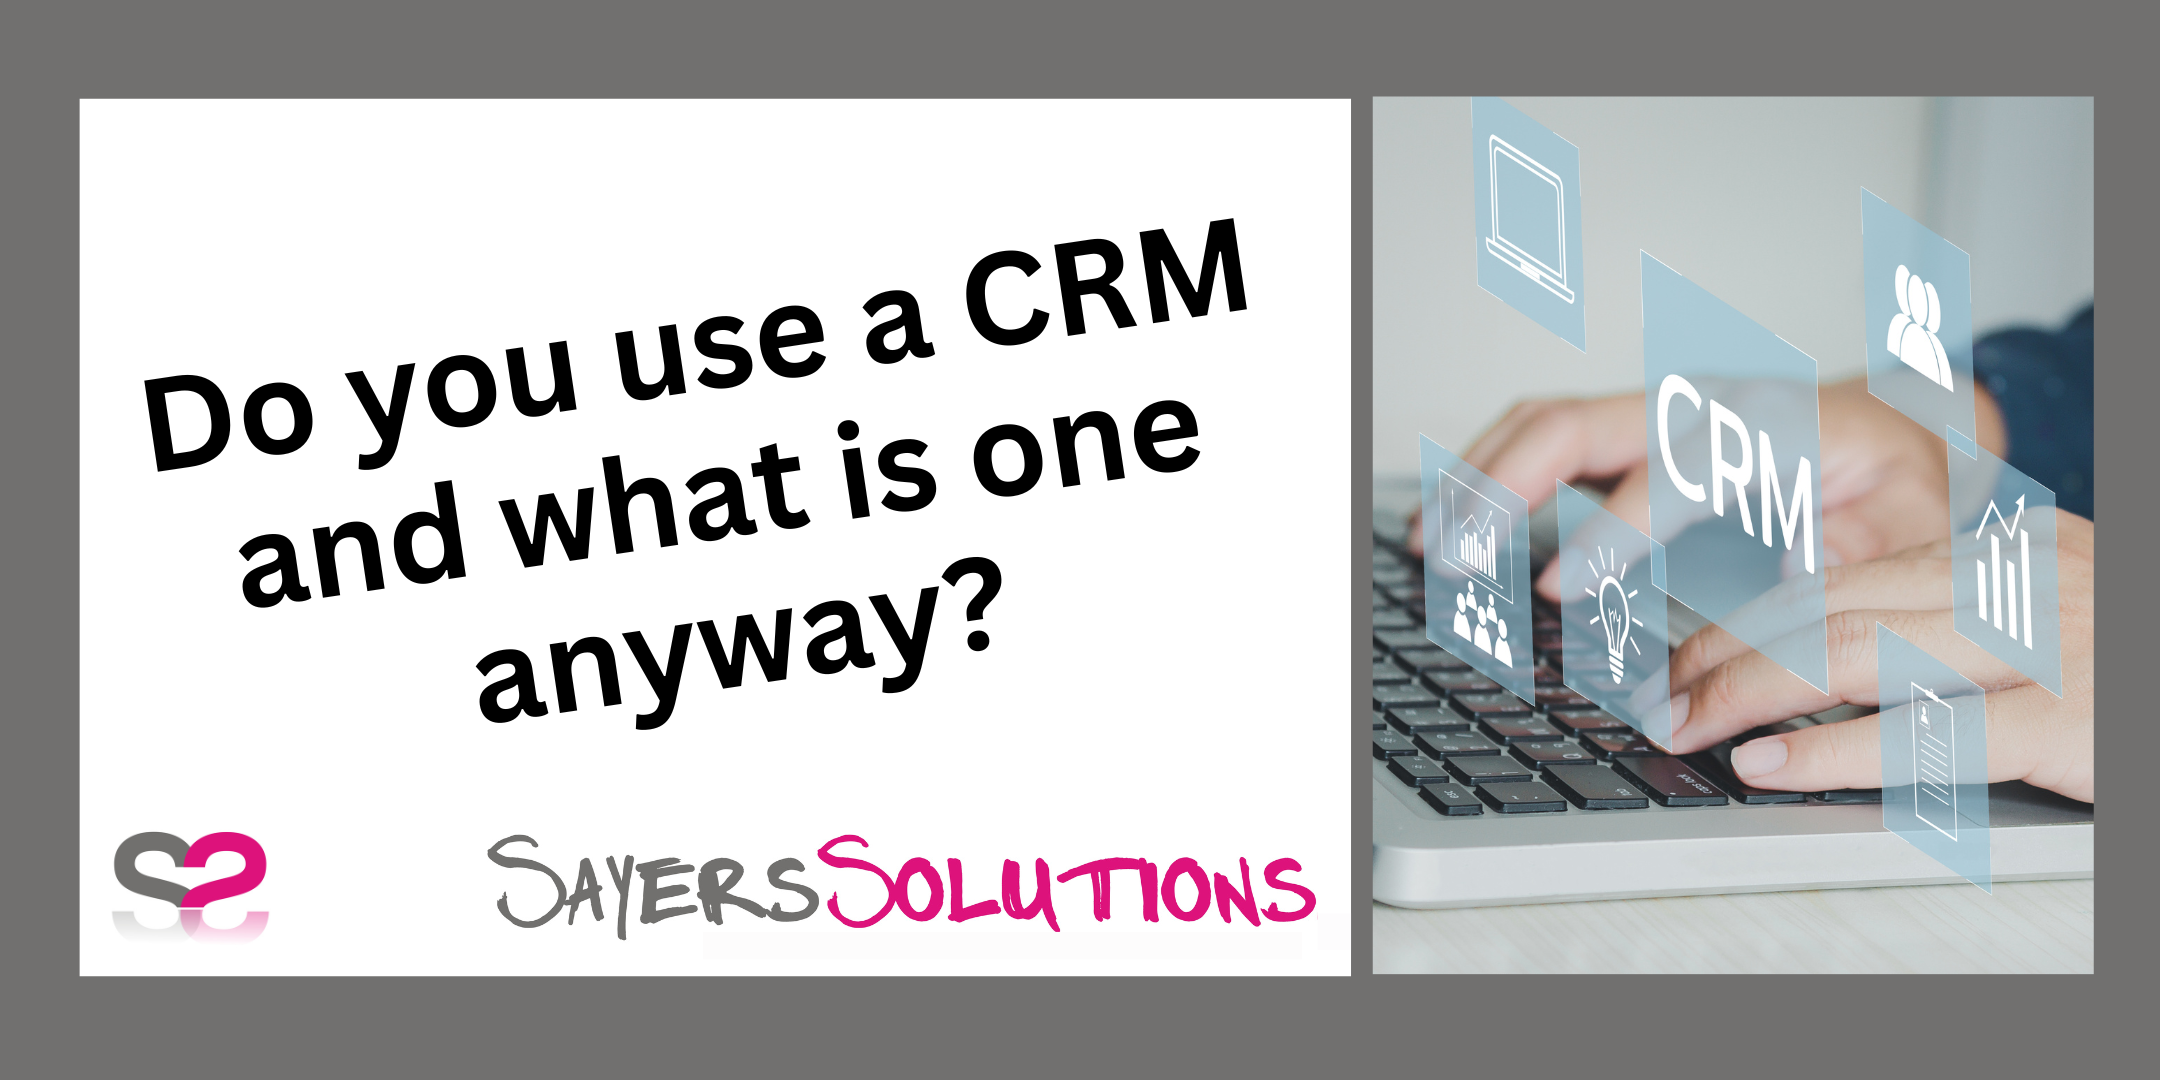 Do you use a CRM and what is one anyway?